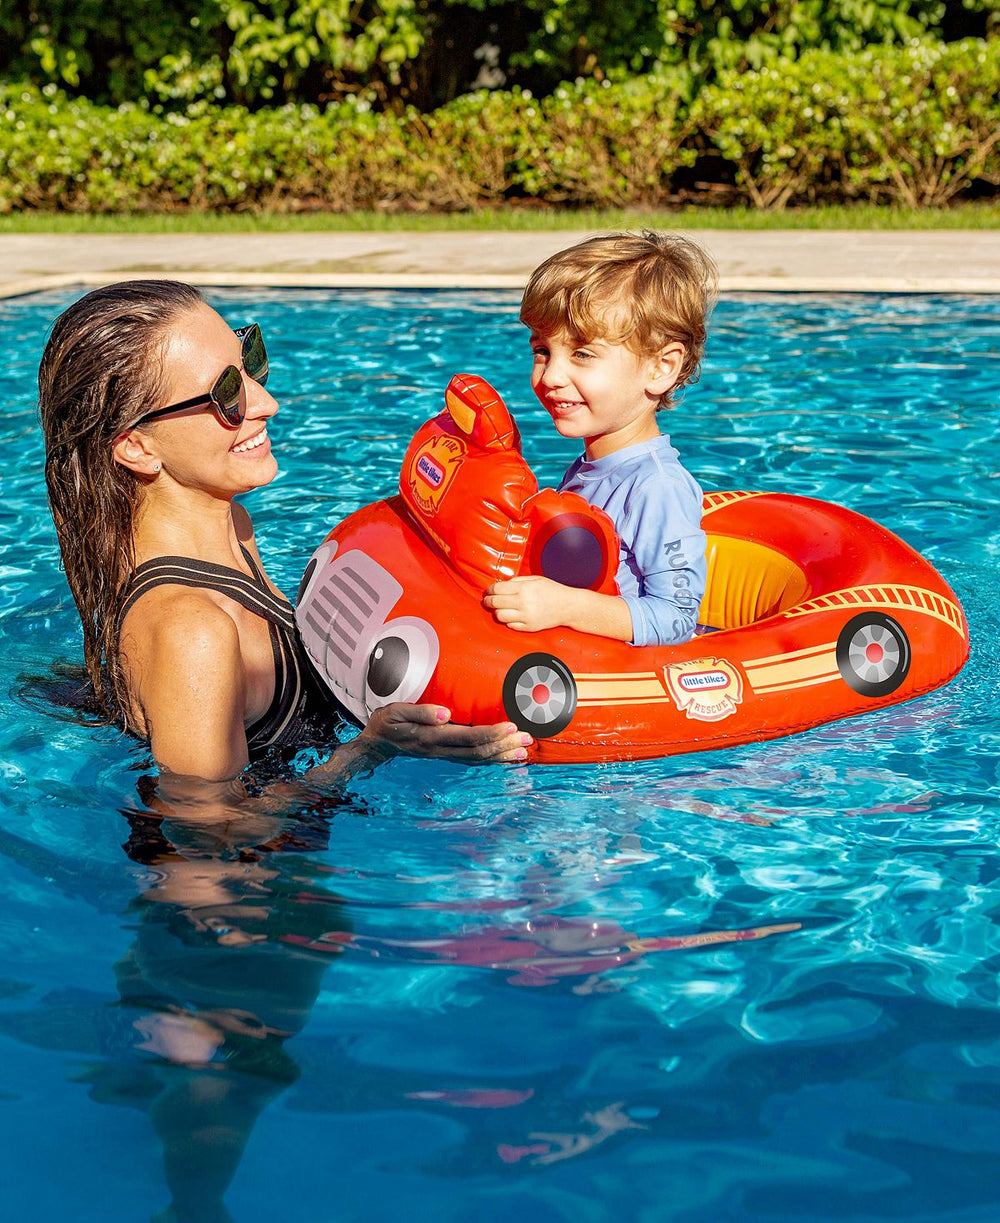 Little Tikes Fire Truck Baby Float - Inflatable Pool Toy with Built-in Seat